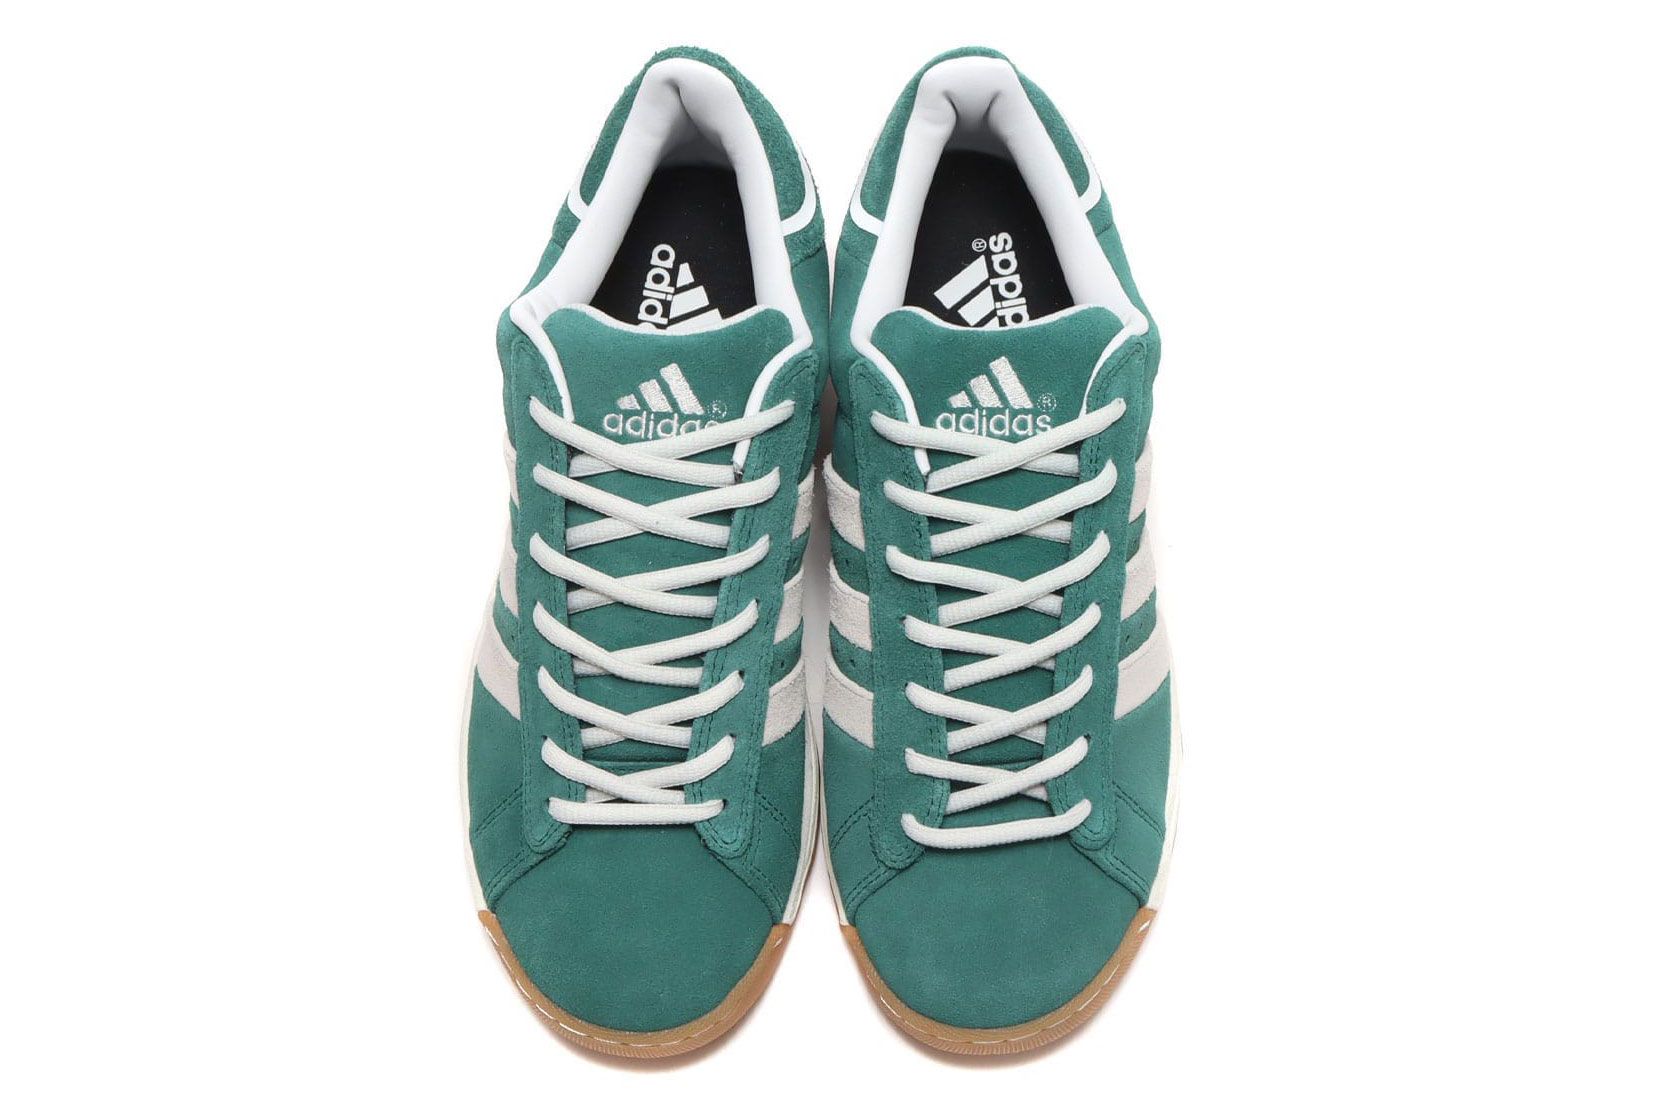 The atmos x adidas Campus Supreme Sole Is Coming to the US